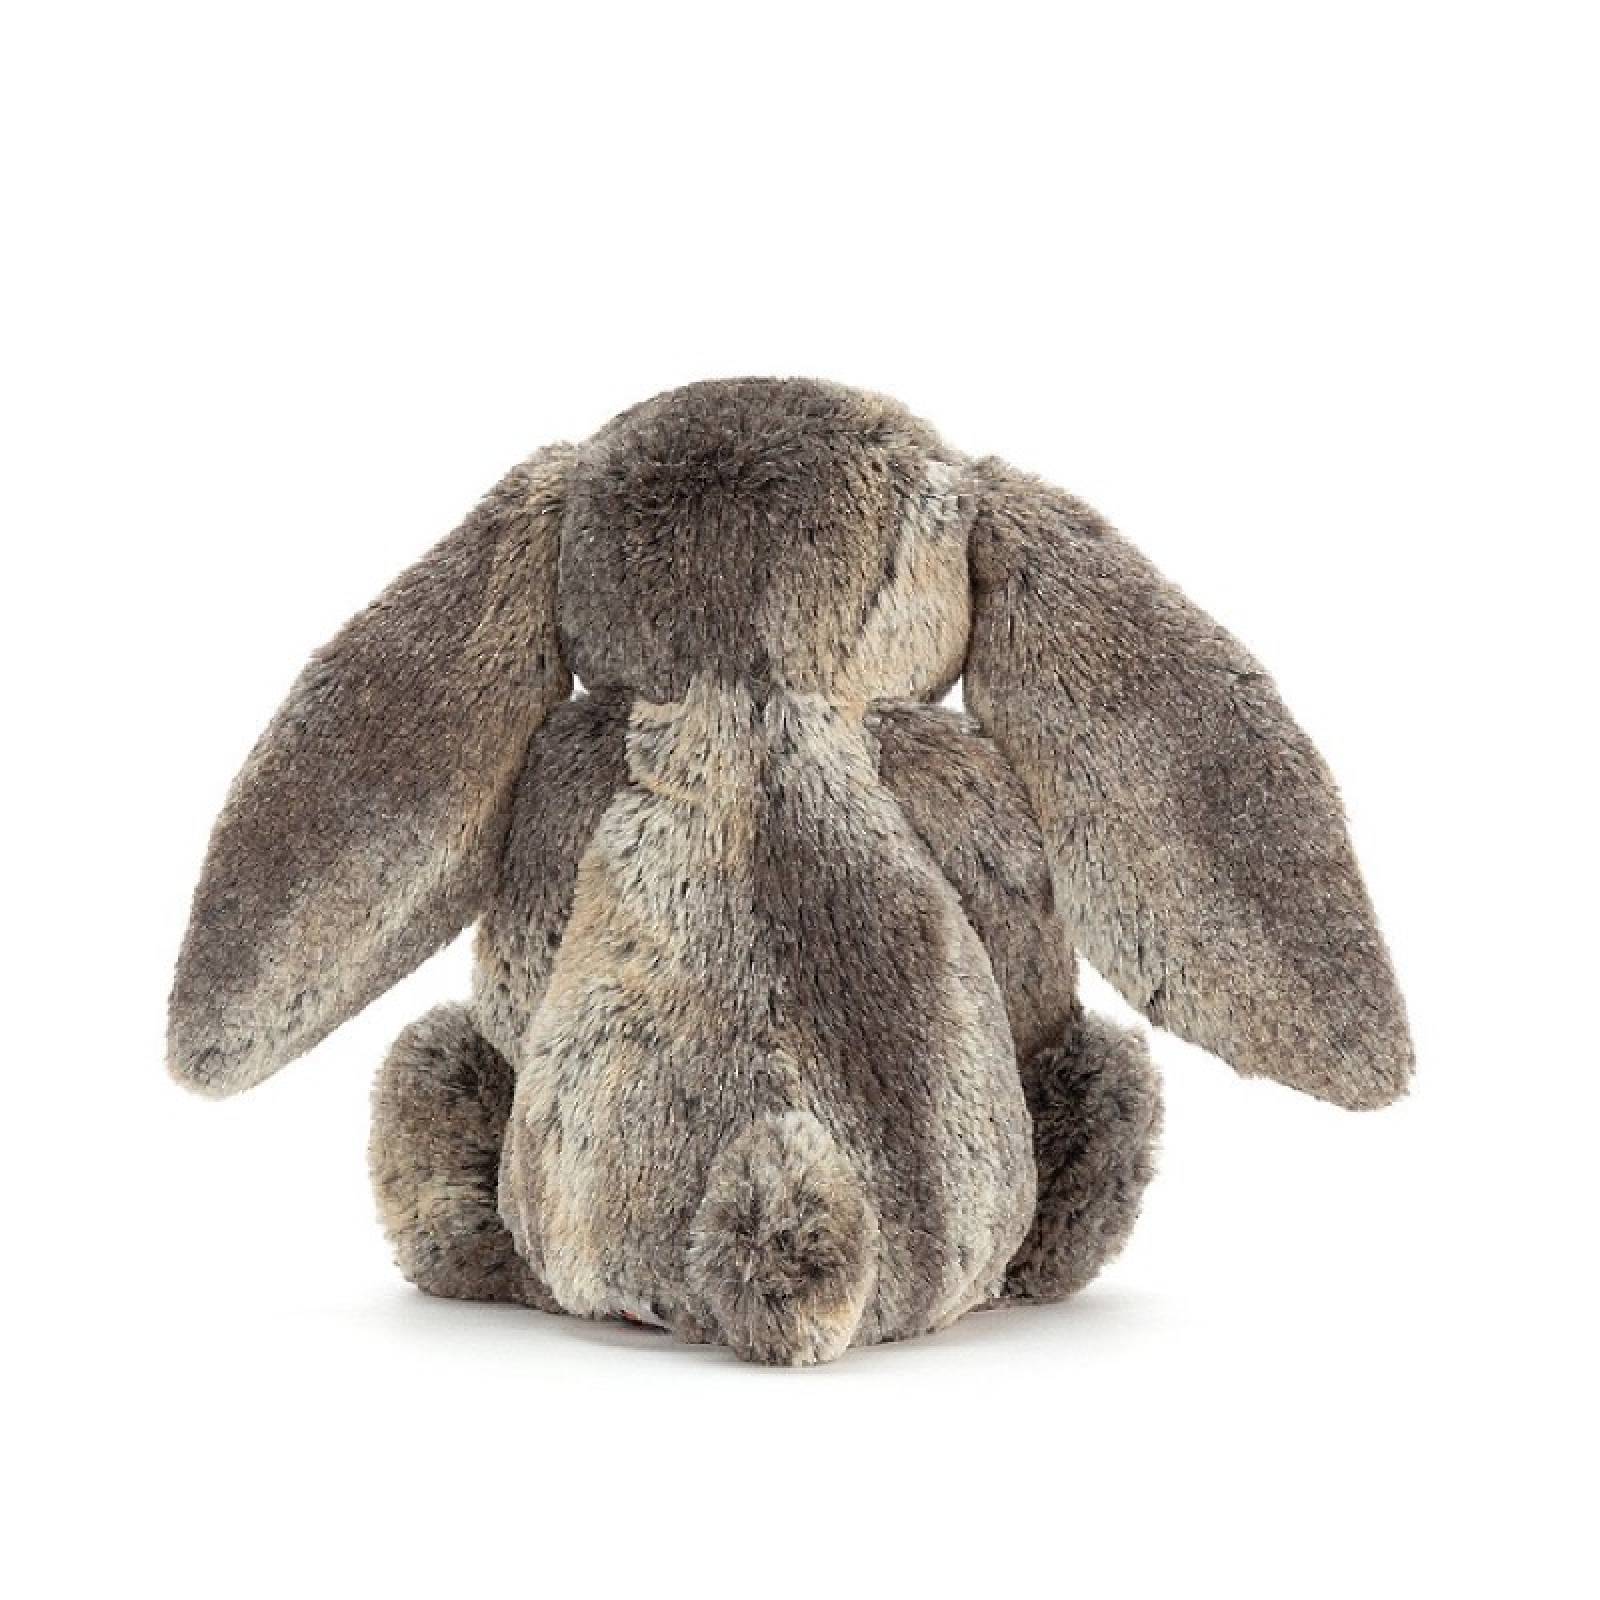 Medium Bashful Bunny In Cottontail Soft Toy By Jellycat thumbnails